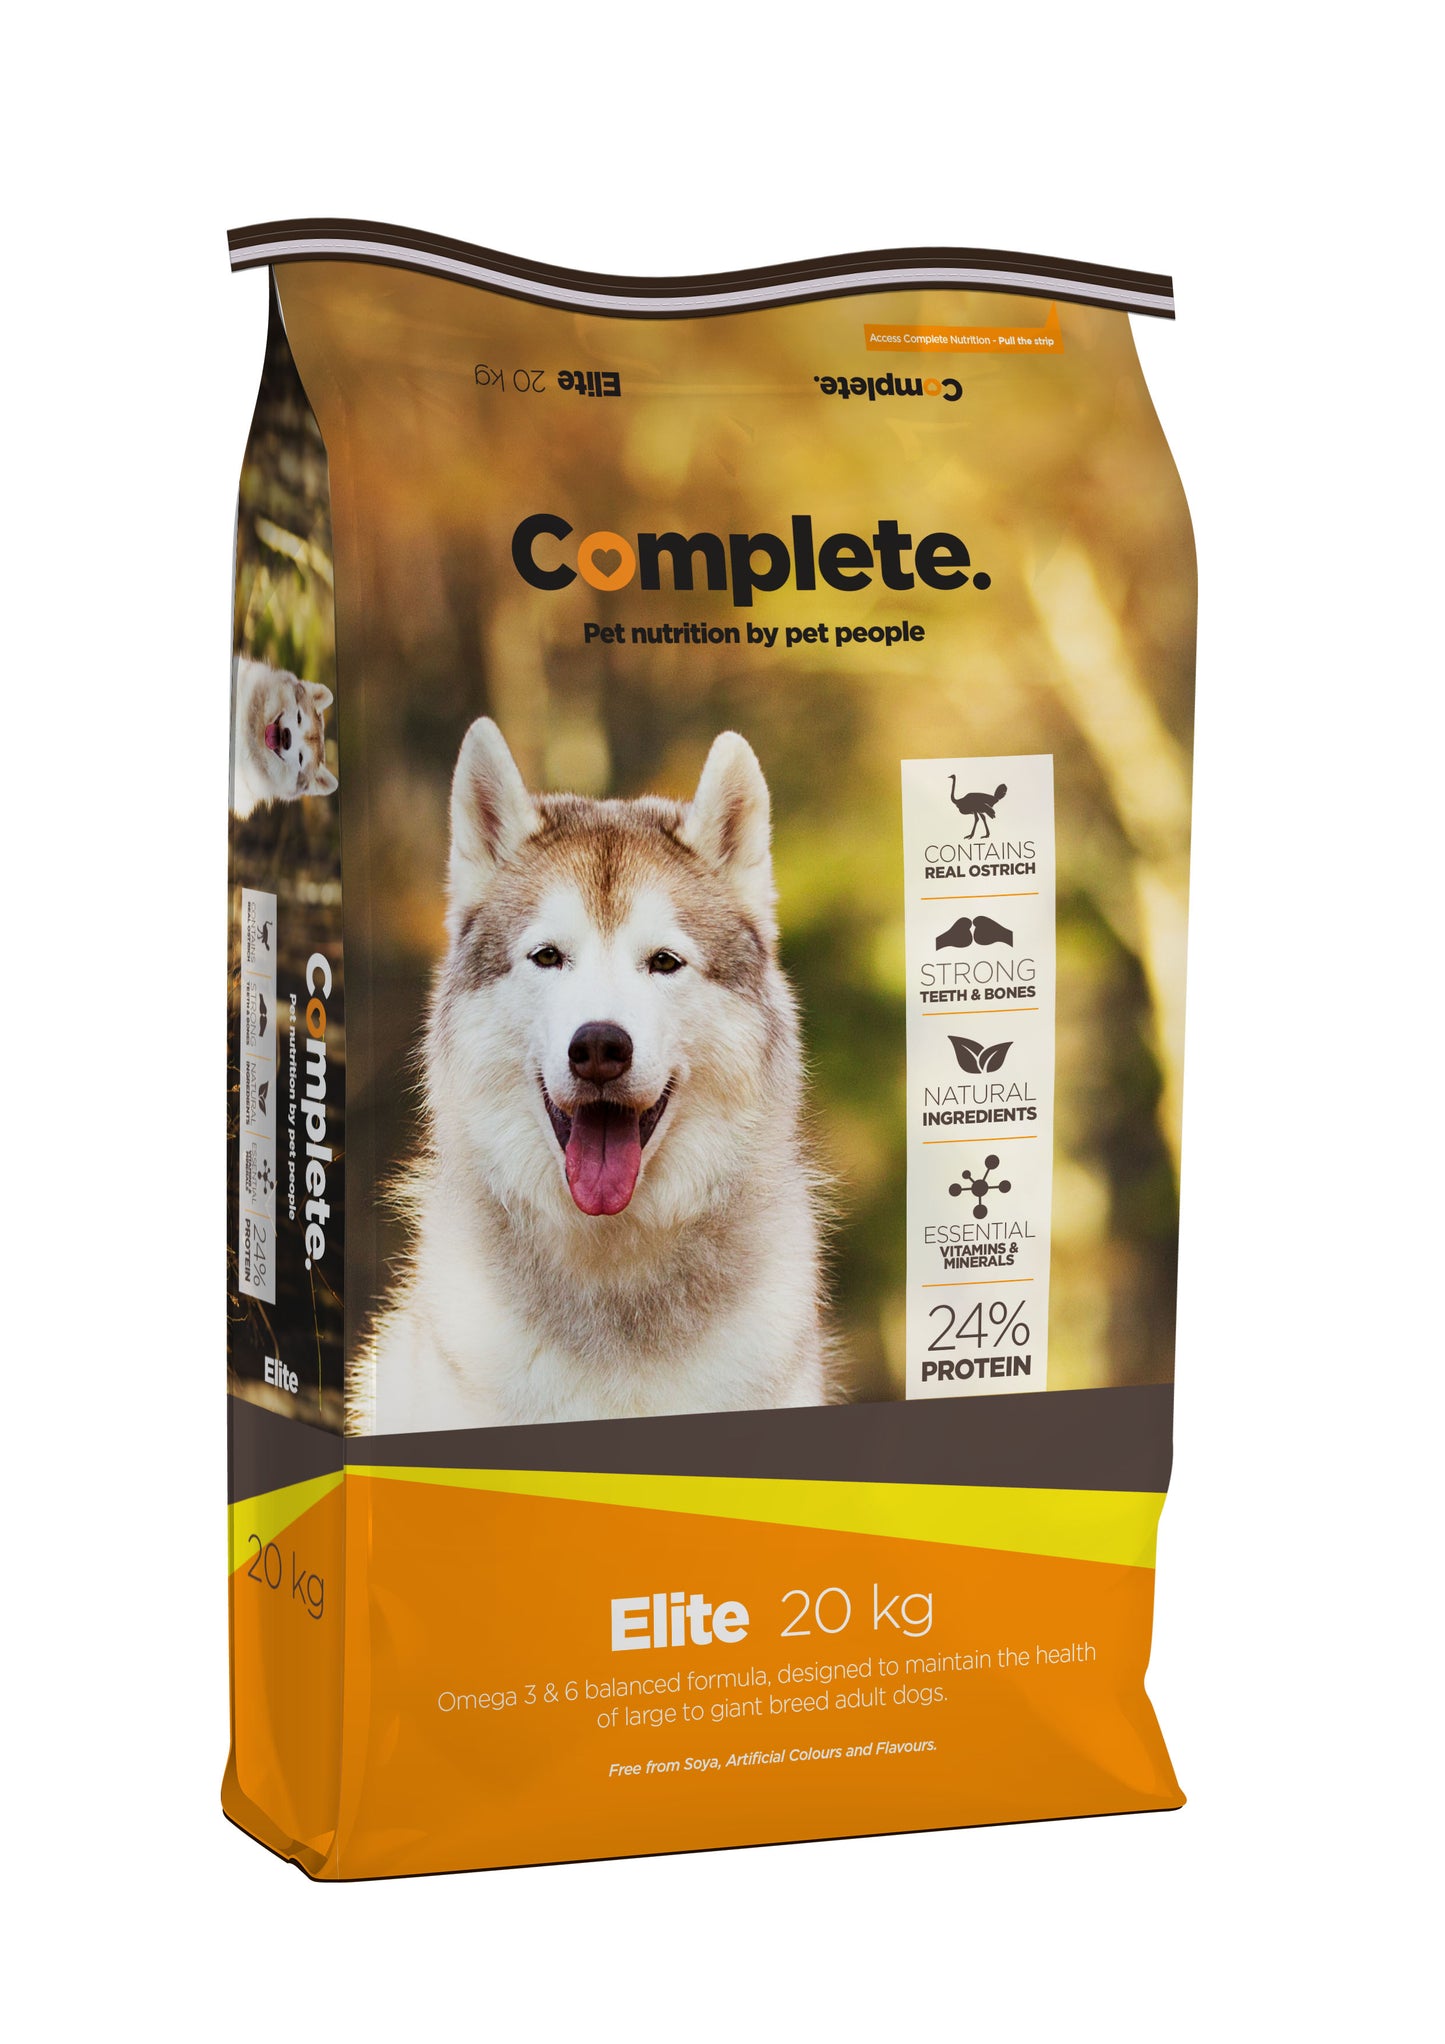 Elite 20kg Complete Pet Food For Large & Giant breed adult dogs from Pets Planet - South Africa’s No.1 Online Pet Store for premium pet products, best pet store near me, Dog food, pet food, dog wet food, dog bed, dog beds, washable dog bed, takealot dog bed, plush dog bed, Complete Pet Nutrition, Complete pet nutrition dog food, hills dog food, optimizor dog food, royal canin dog food, jock dog food, bobtail dog food, canine cuisine, acana dog food, best dog food, dog food near me, best dog food brands